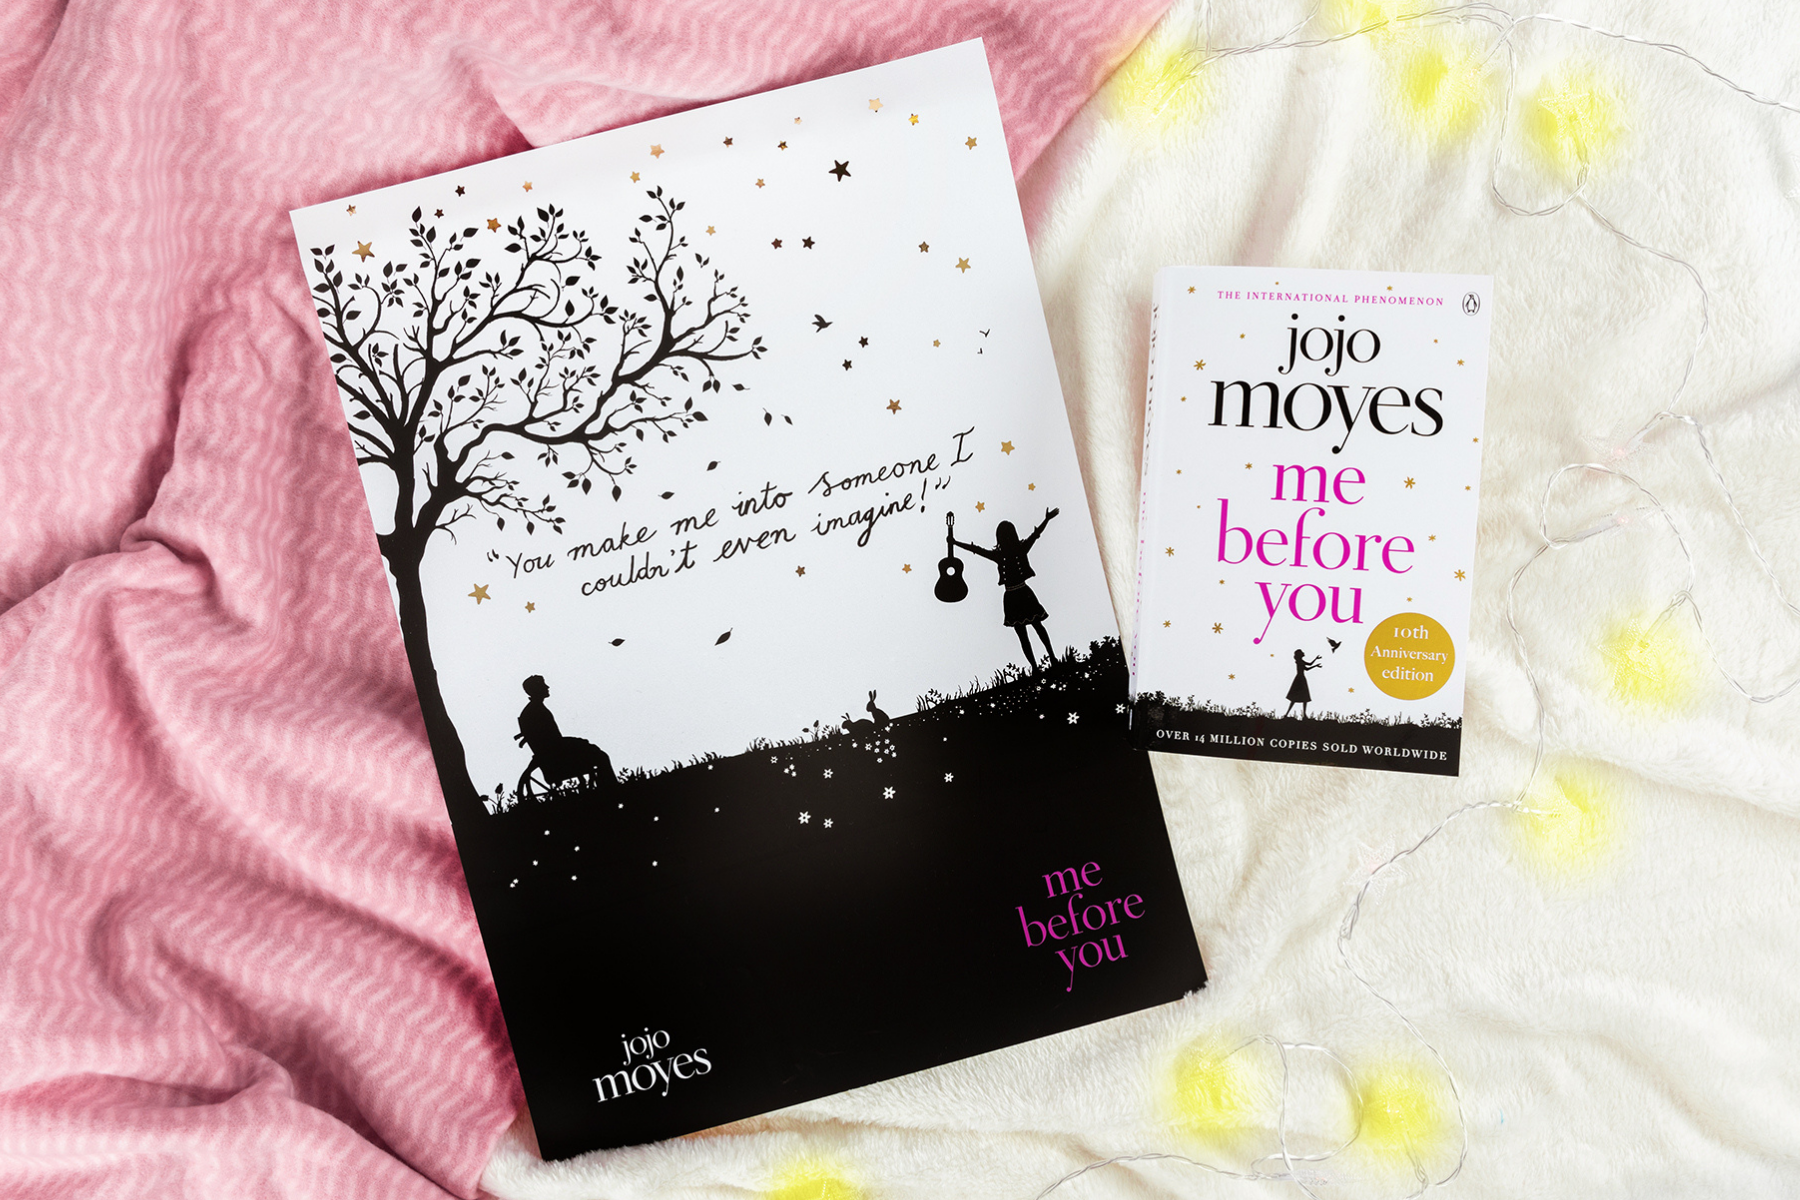 An image of Me Before You by Jojo Moyes on pink and white blankets, beside a string of yellow lights and a print from the book.